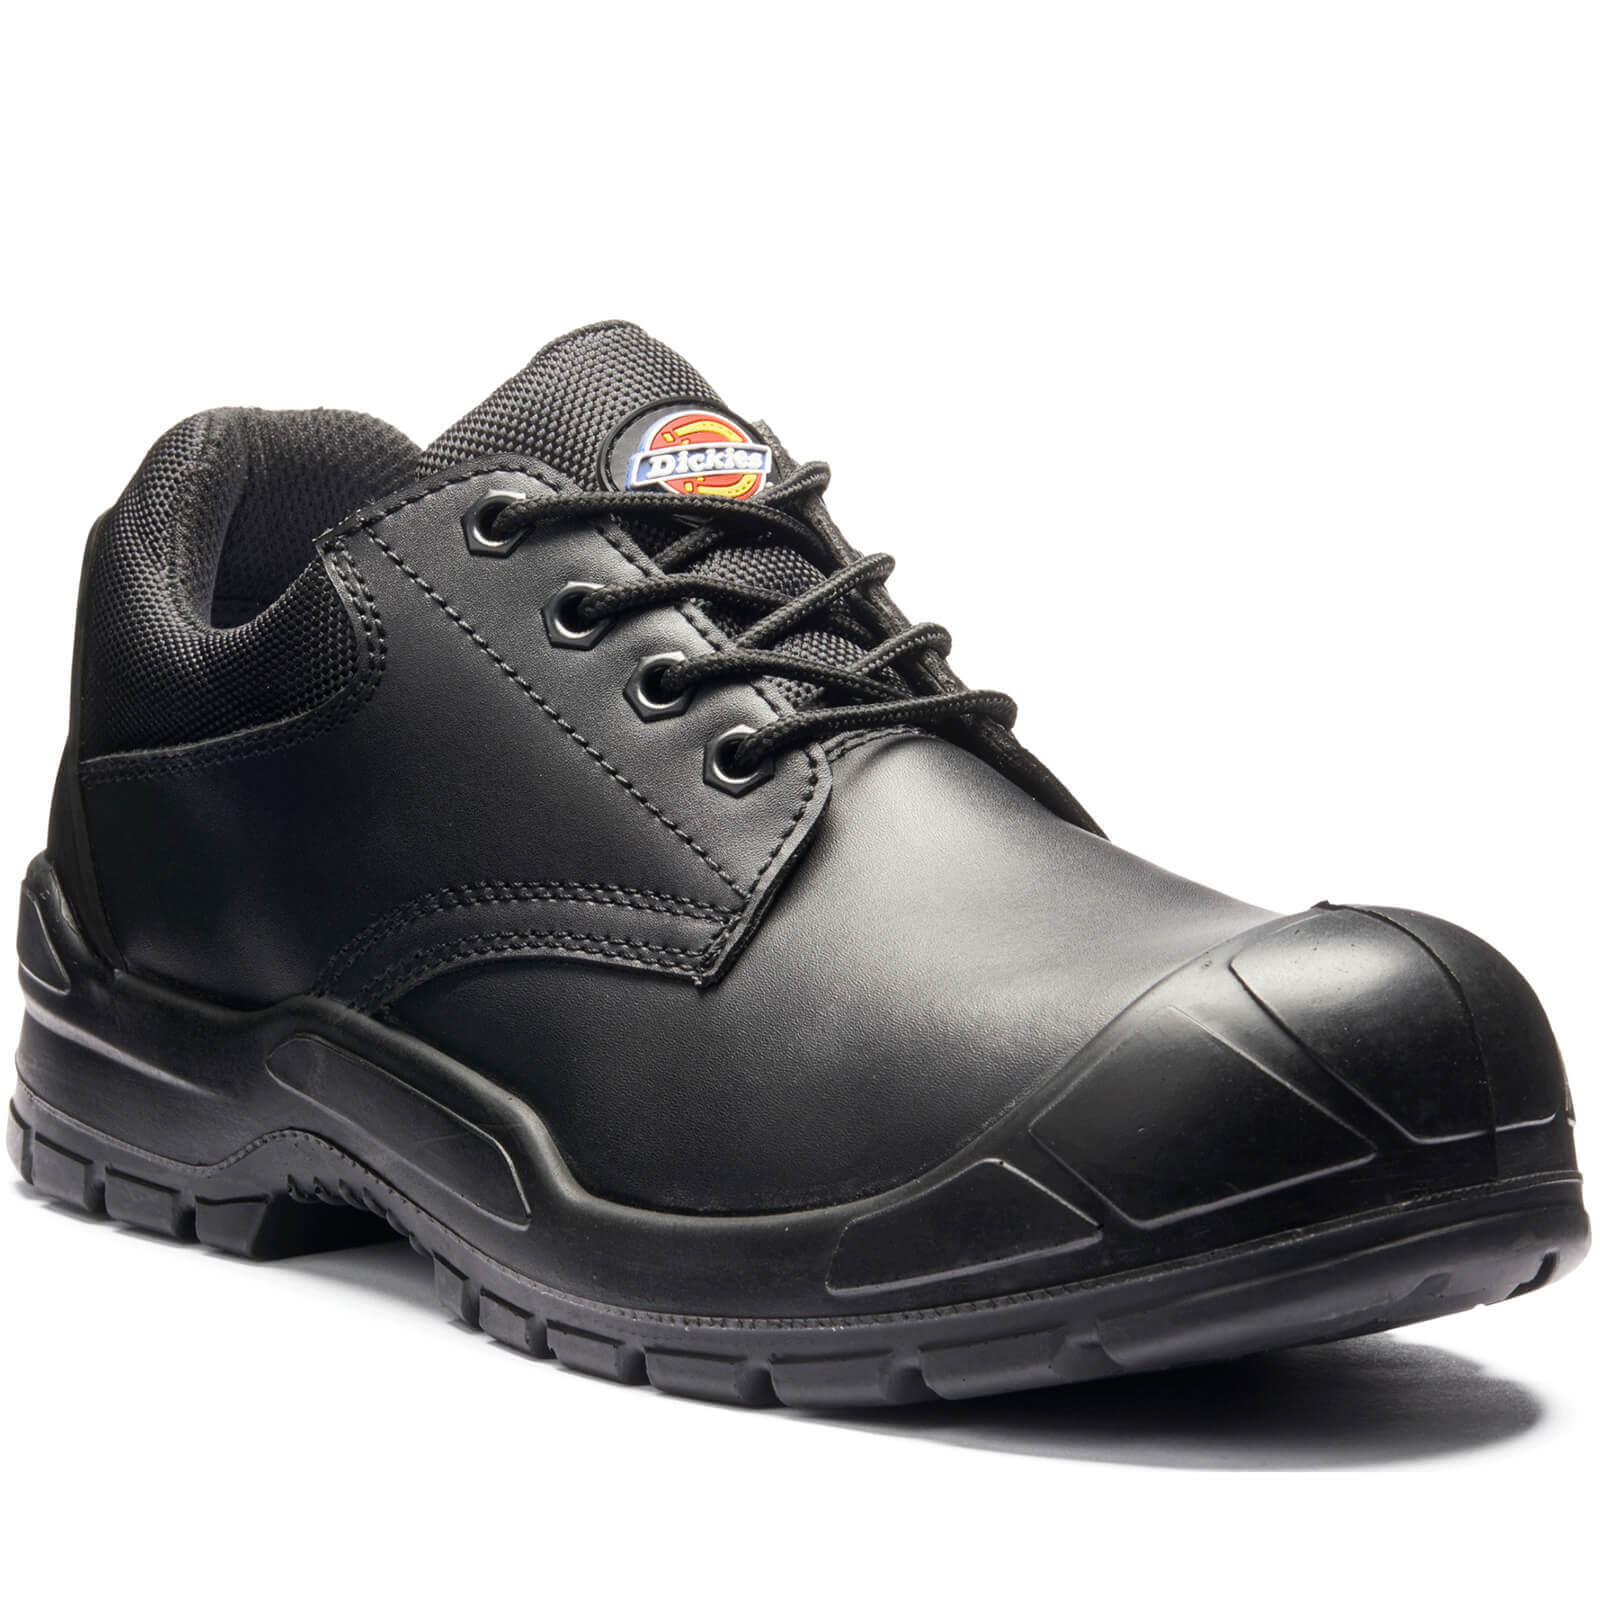 Dickies Trenton Safety Shoe | Work Shoes